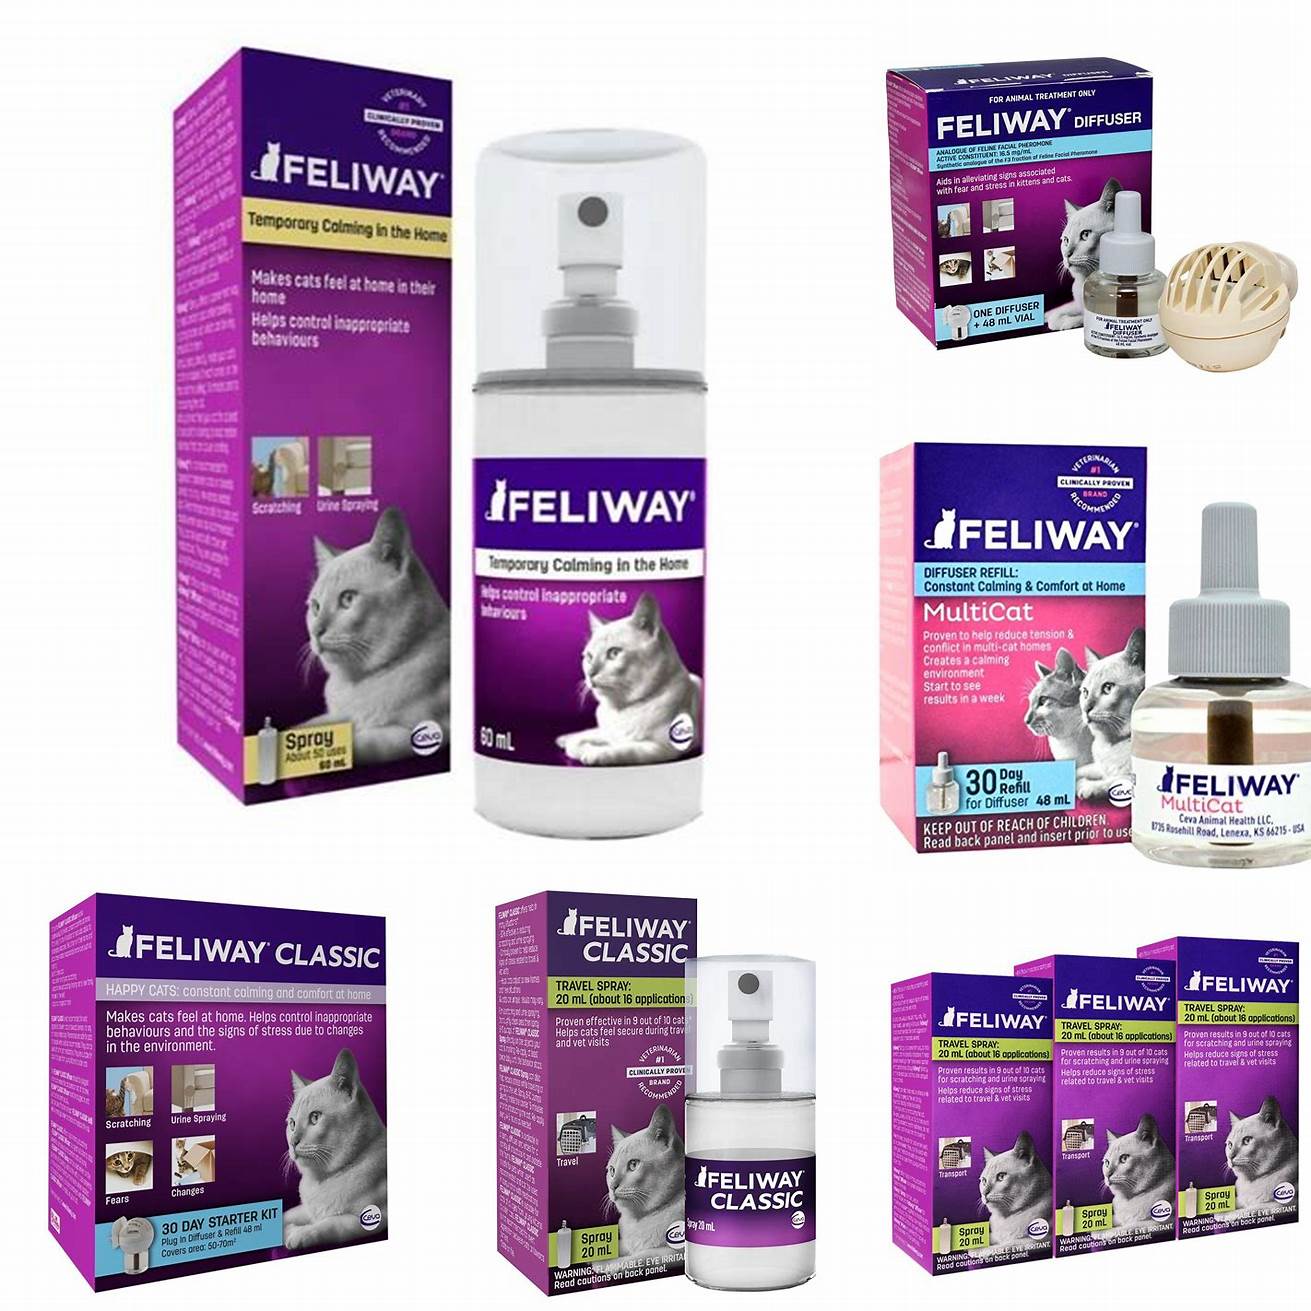 Consider using pheromone products such as Feliway which can help reduce stress and aggression in cats